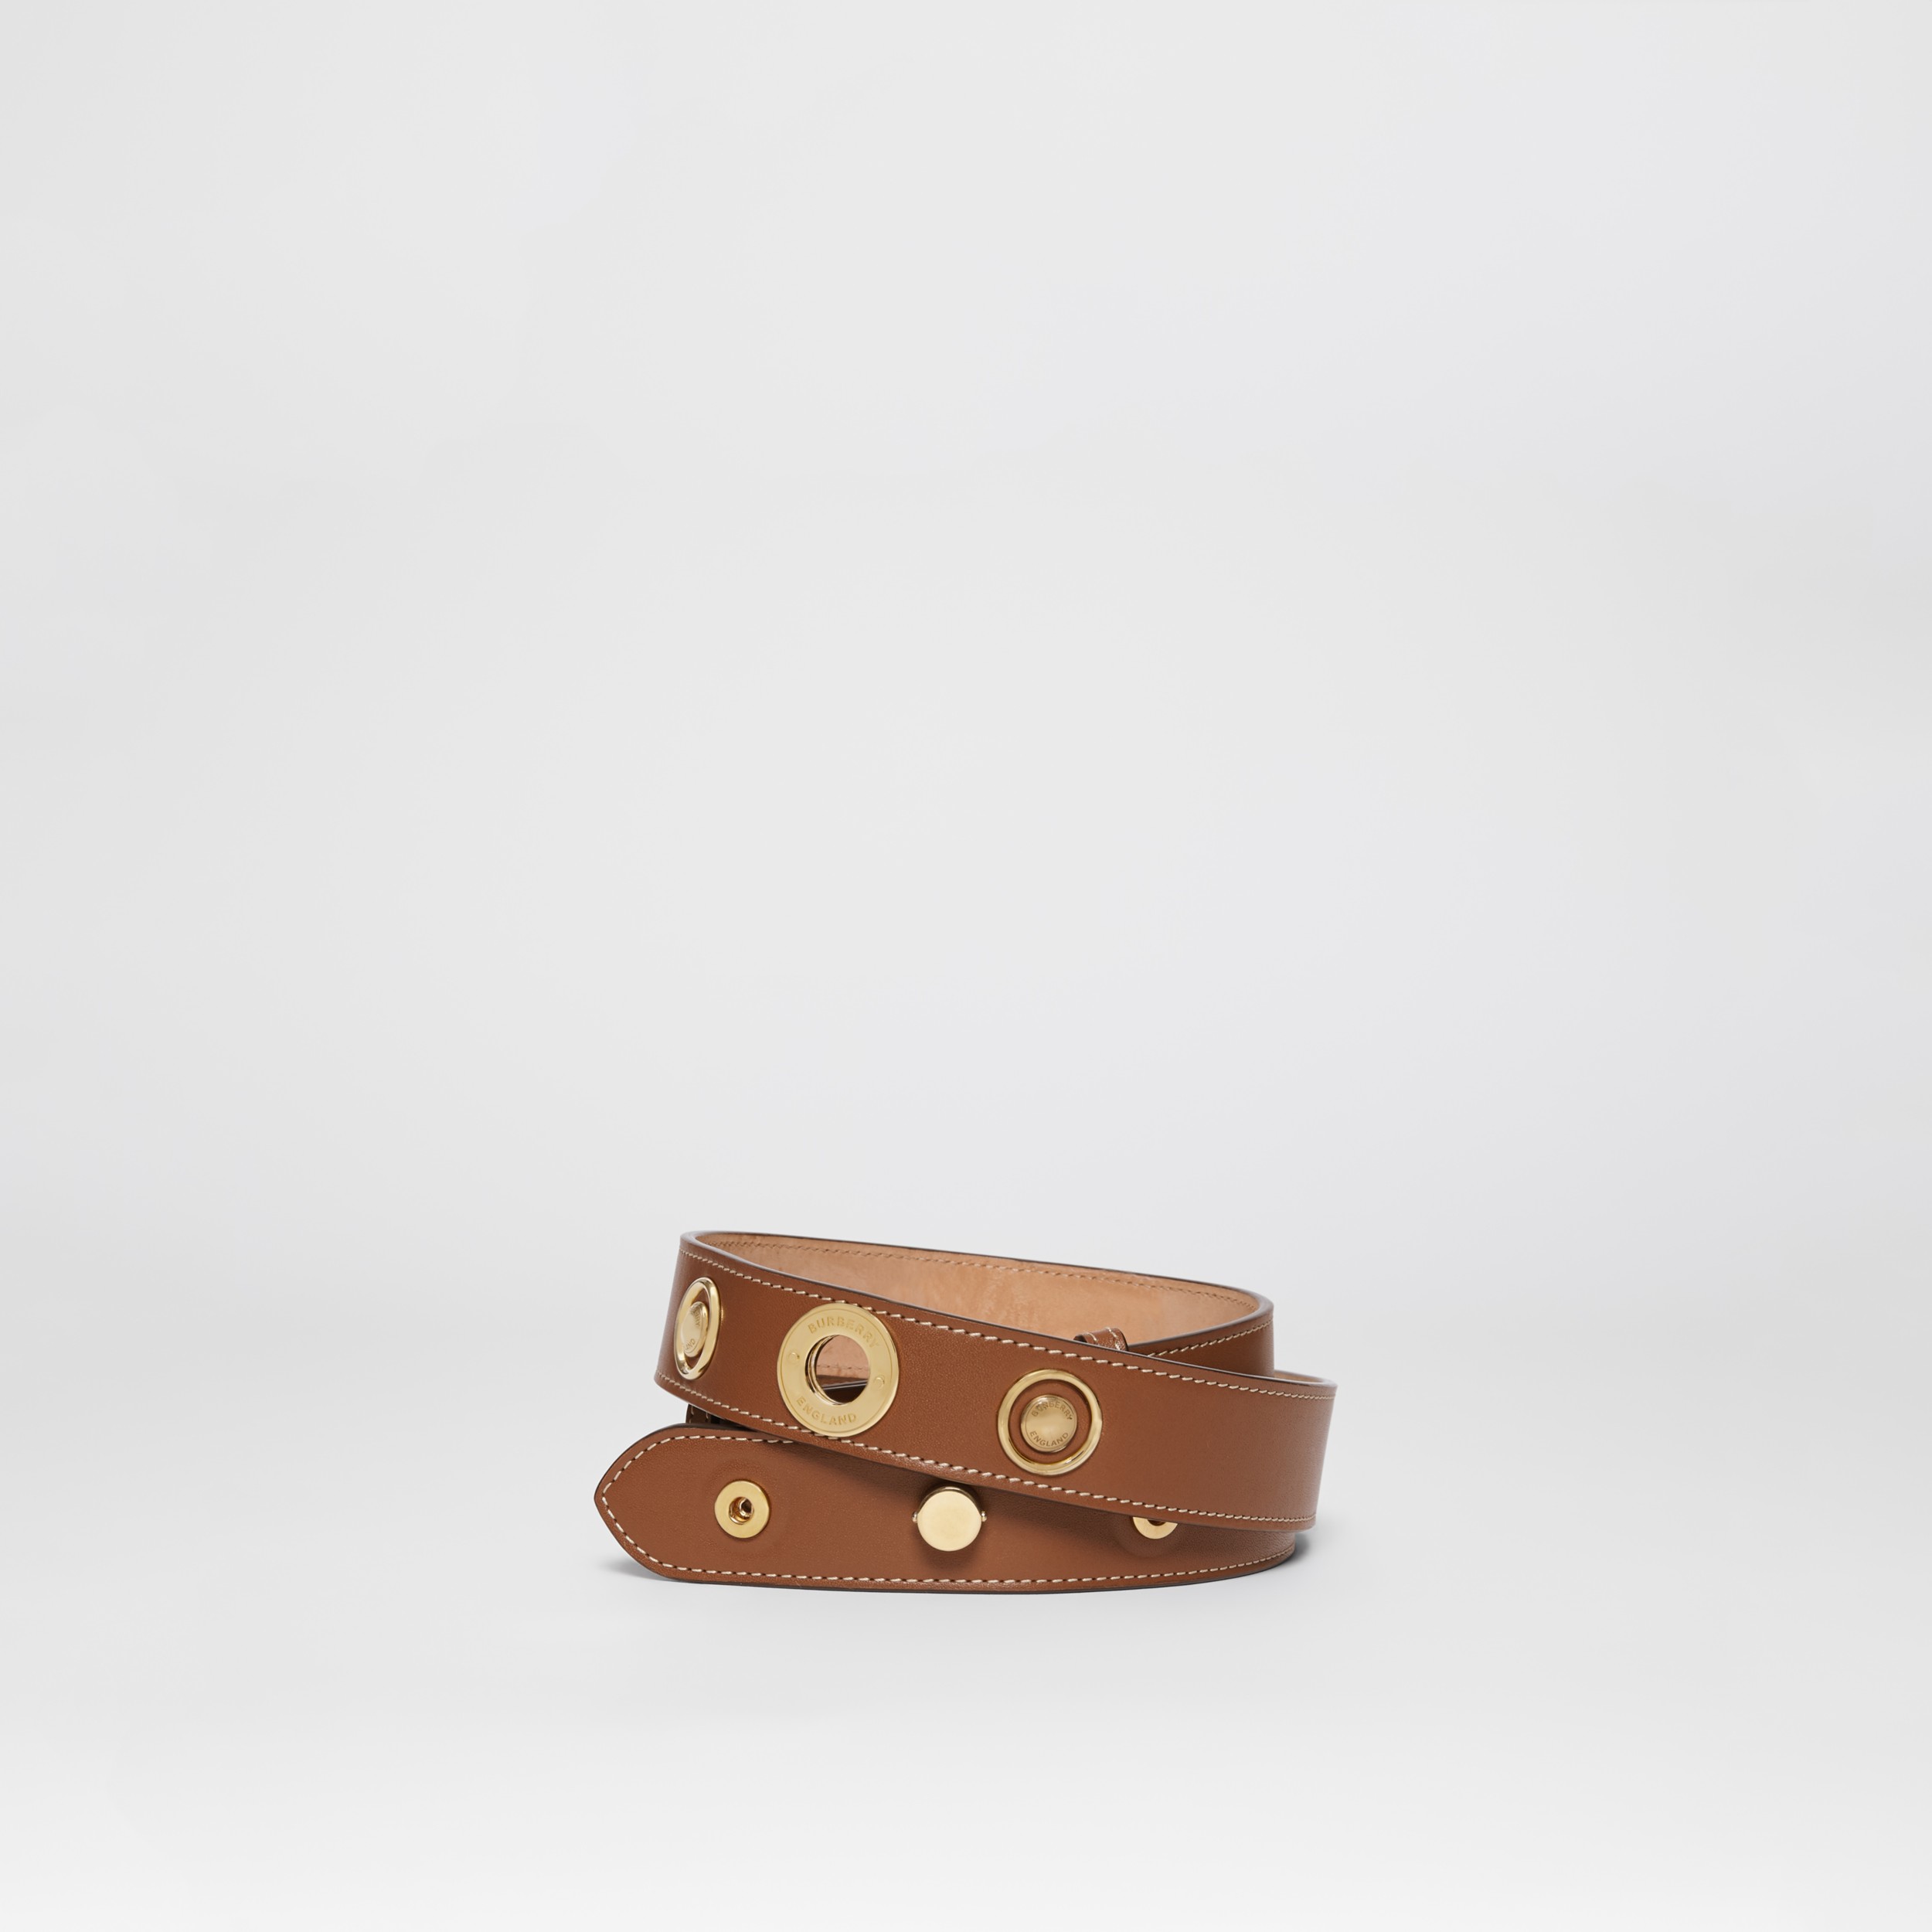 Triple Stud Leather Belt in Tan | Burberry United States